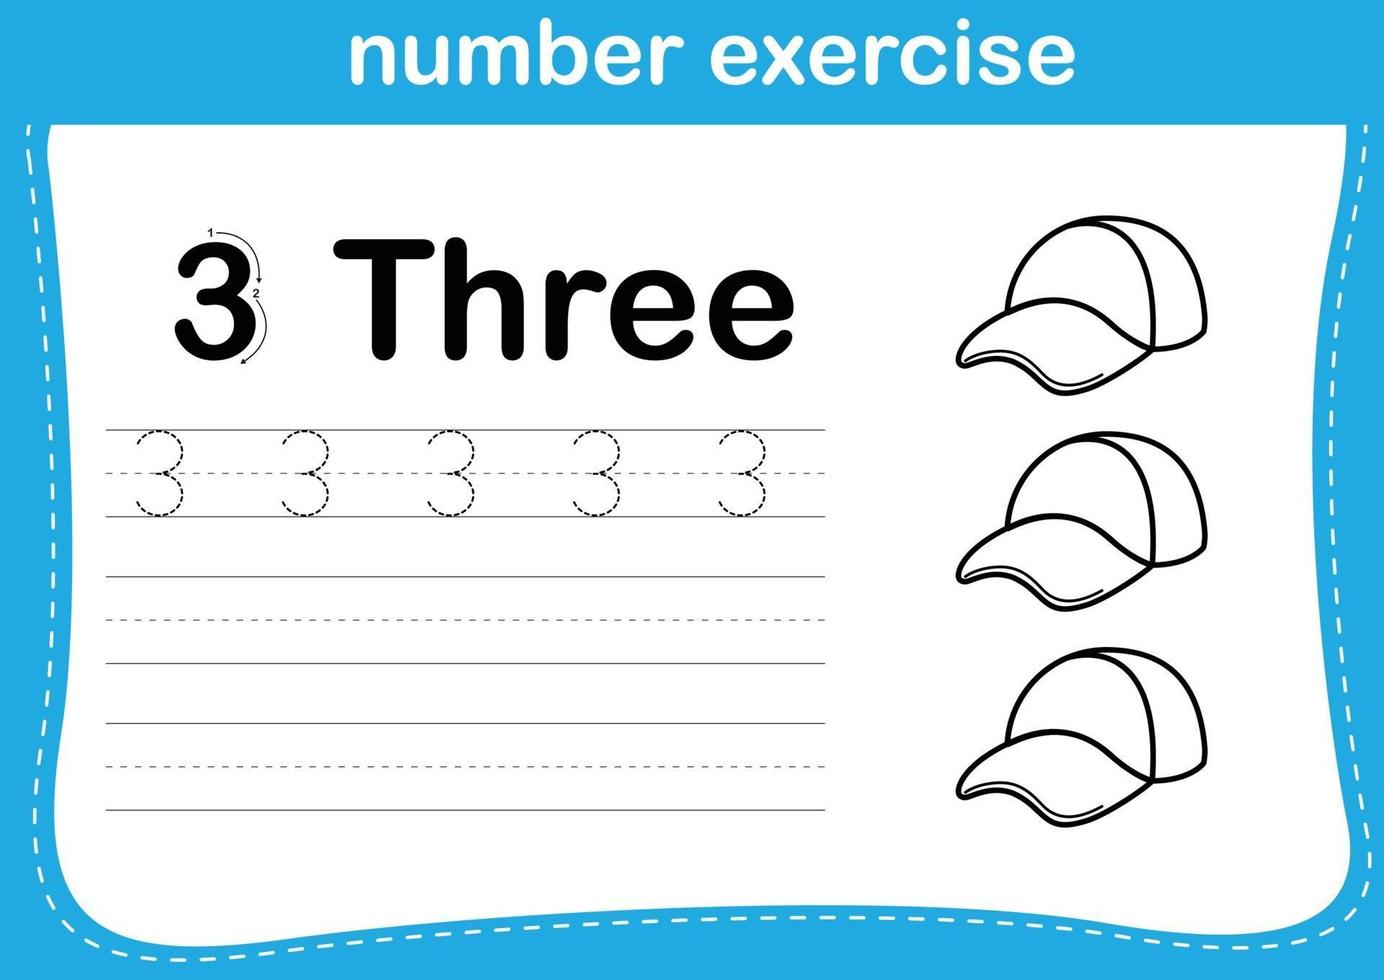 number exercise with cartoon coloring book illustration, vector